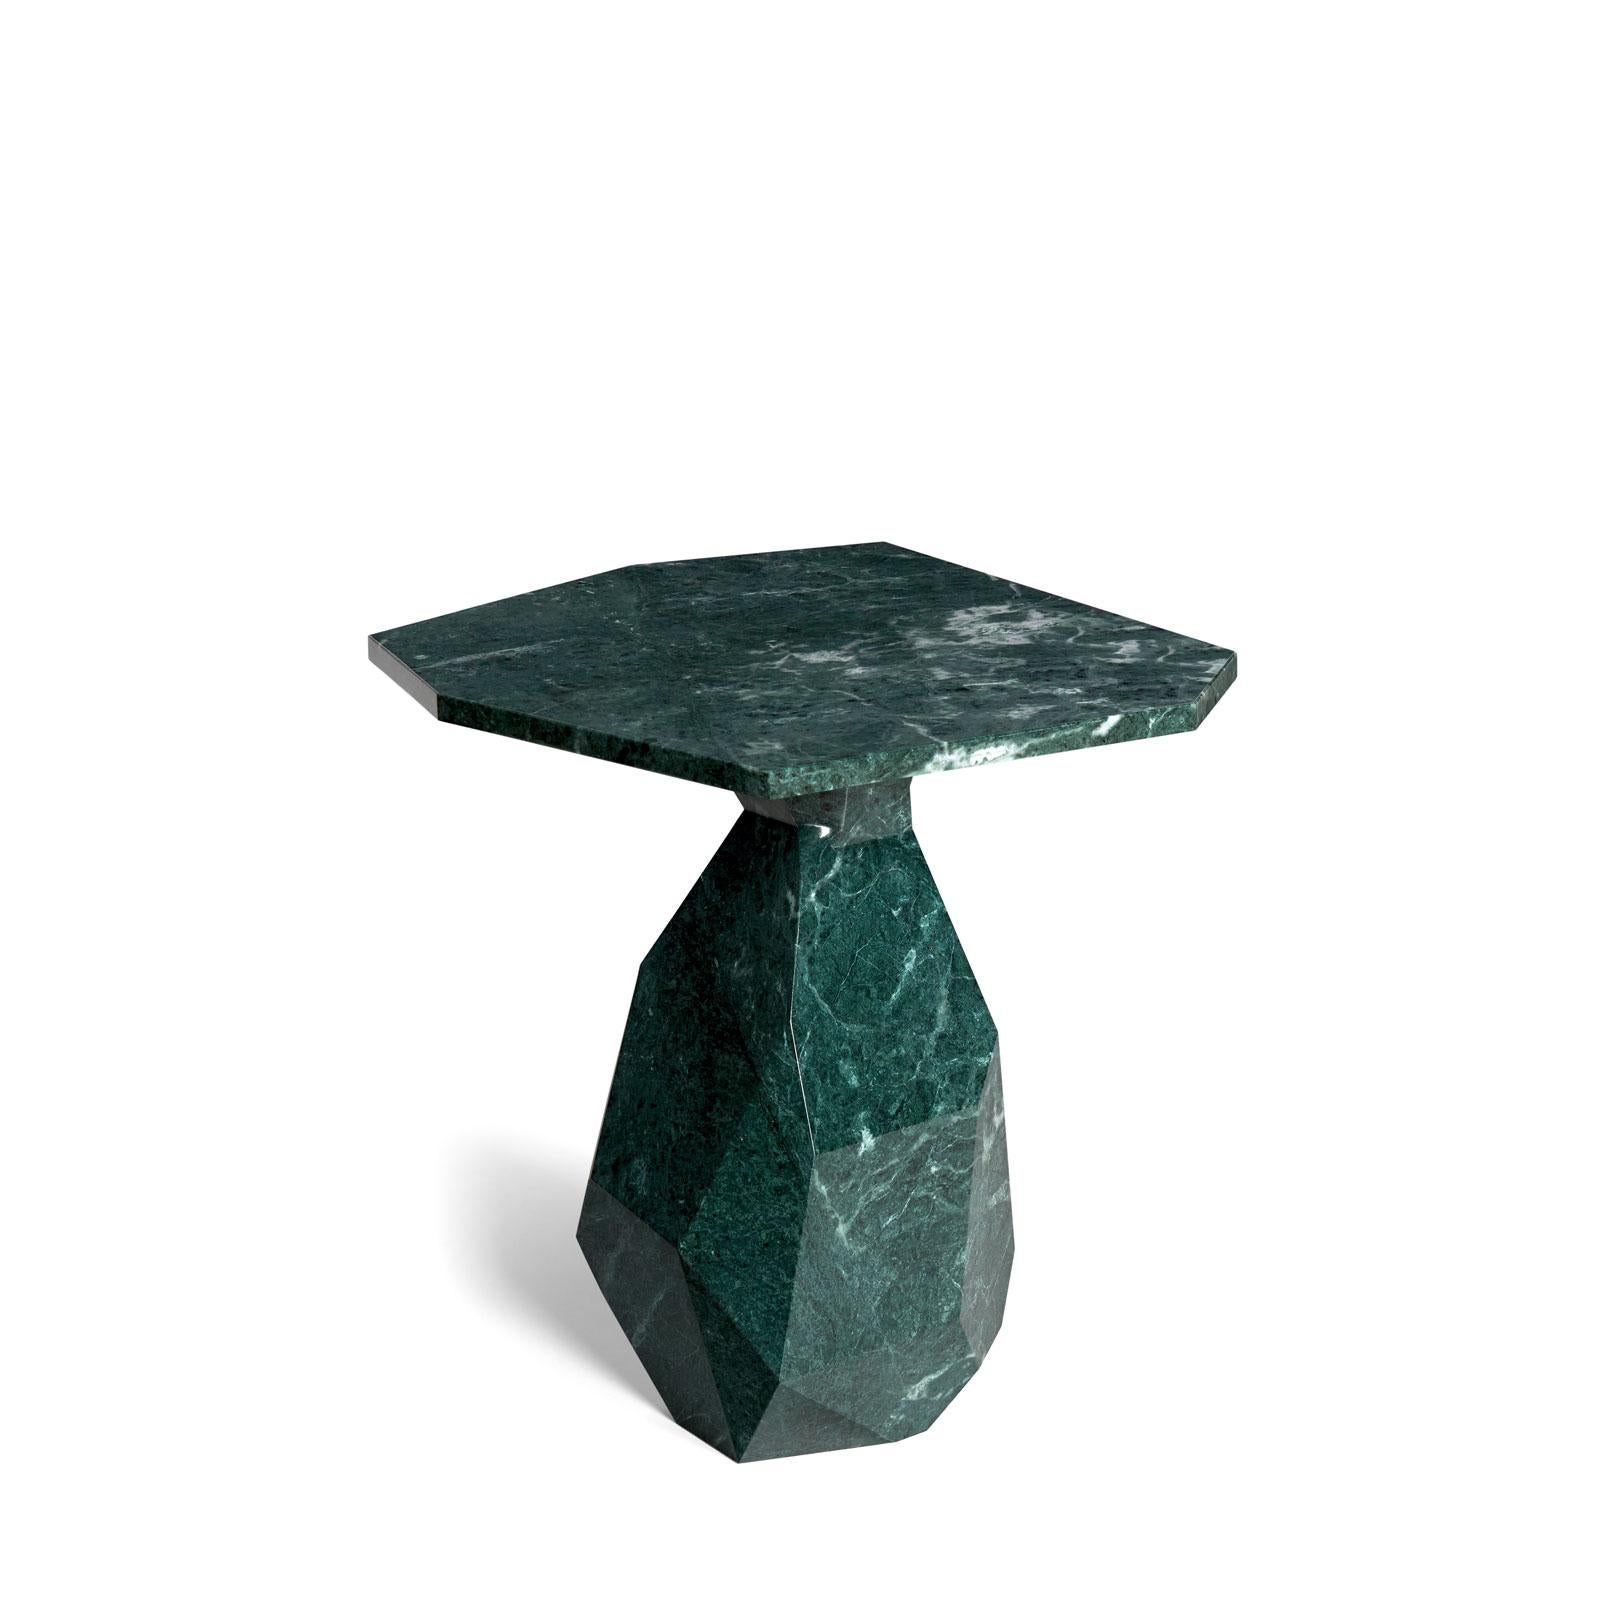 Encapsulating the commanding presence of Nature, this side table is a bold design statement. Made from a single block of marble.
Marble: Carrara, Negro Marquina, Estremoz, Estremoz Rose or Guatemala Green in polished finishing.
Size can be